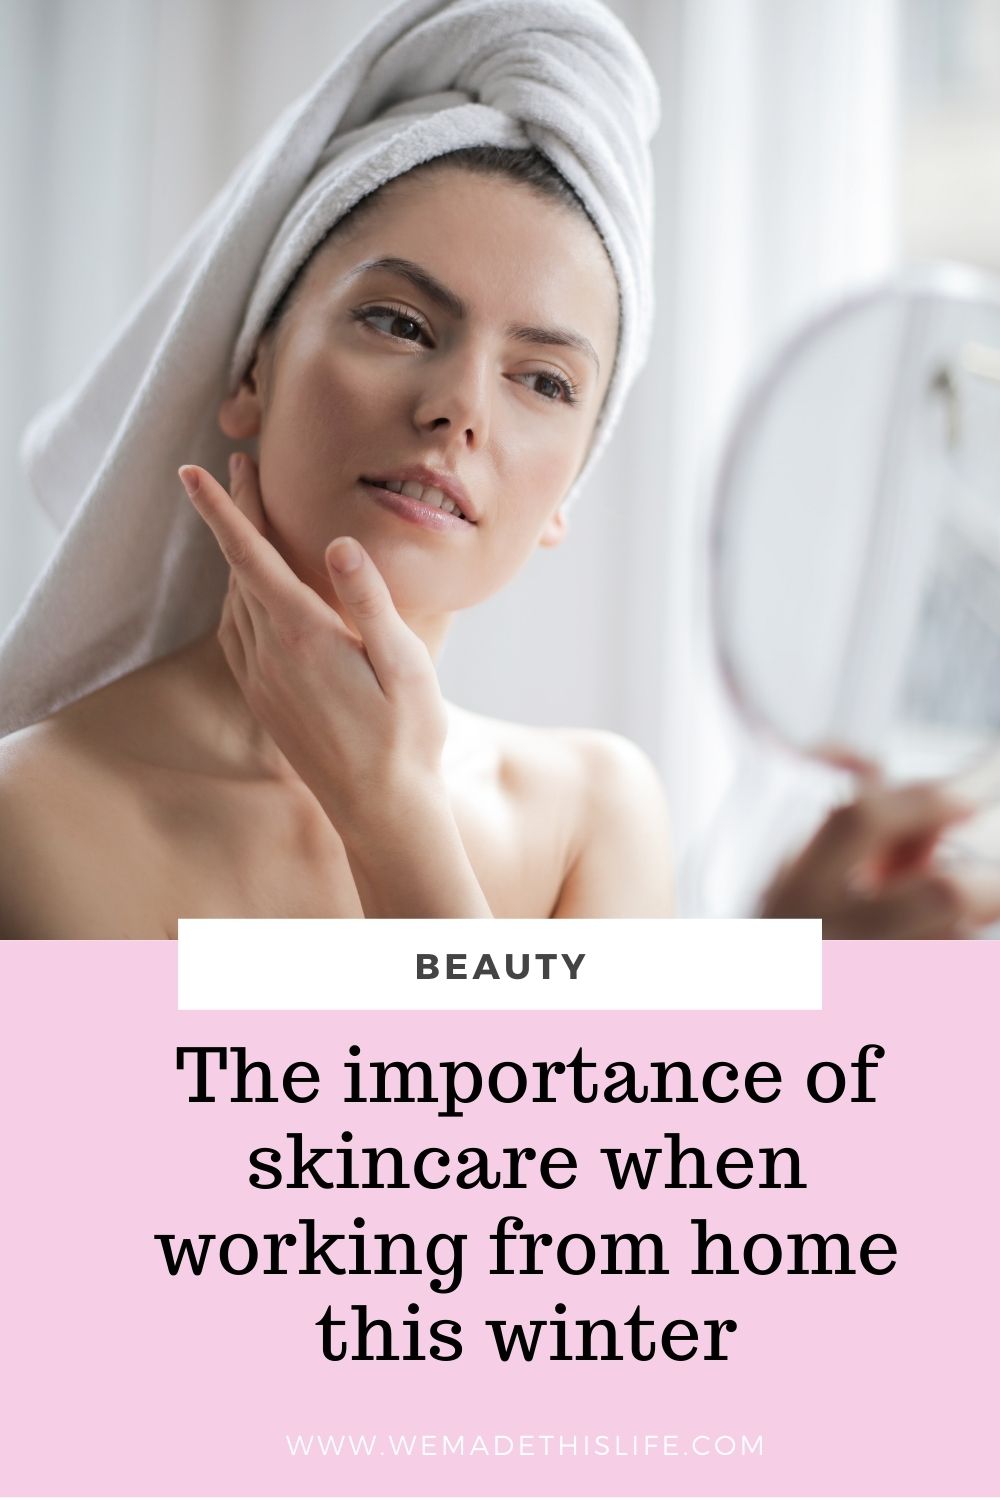 The importance of skincare when working from home this winter